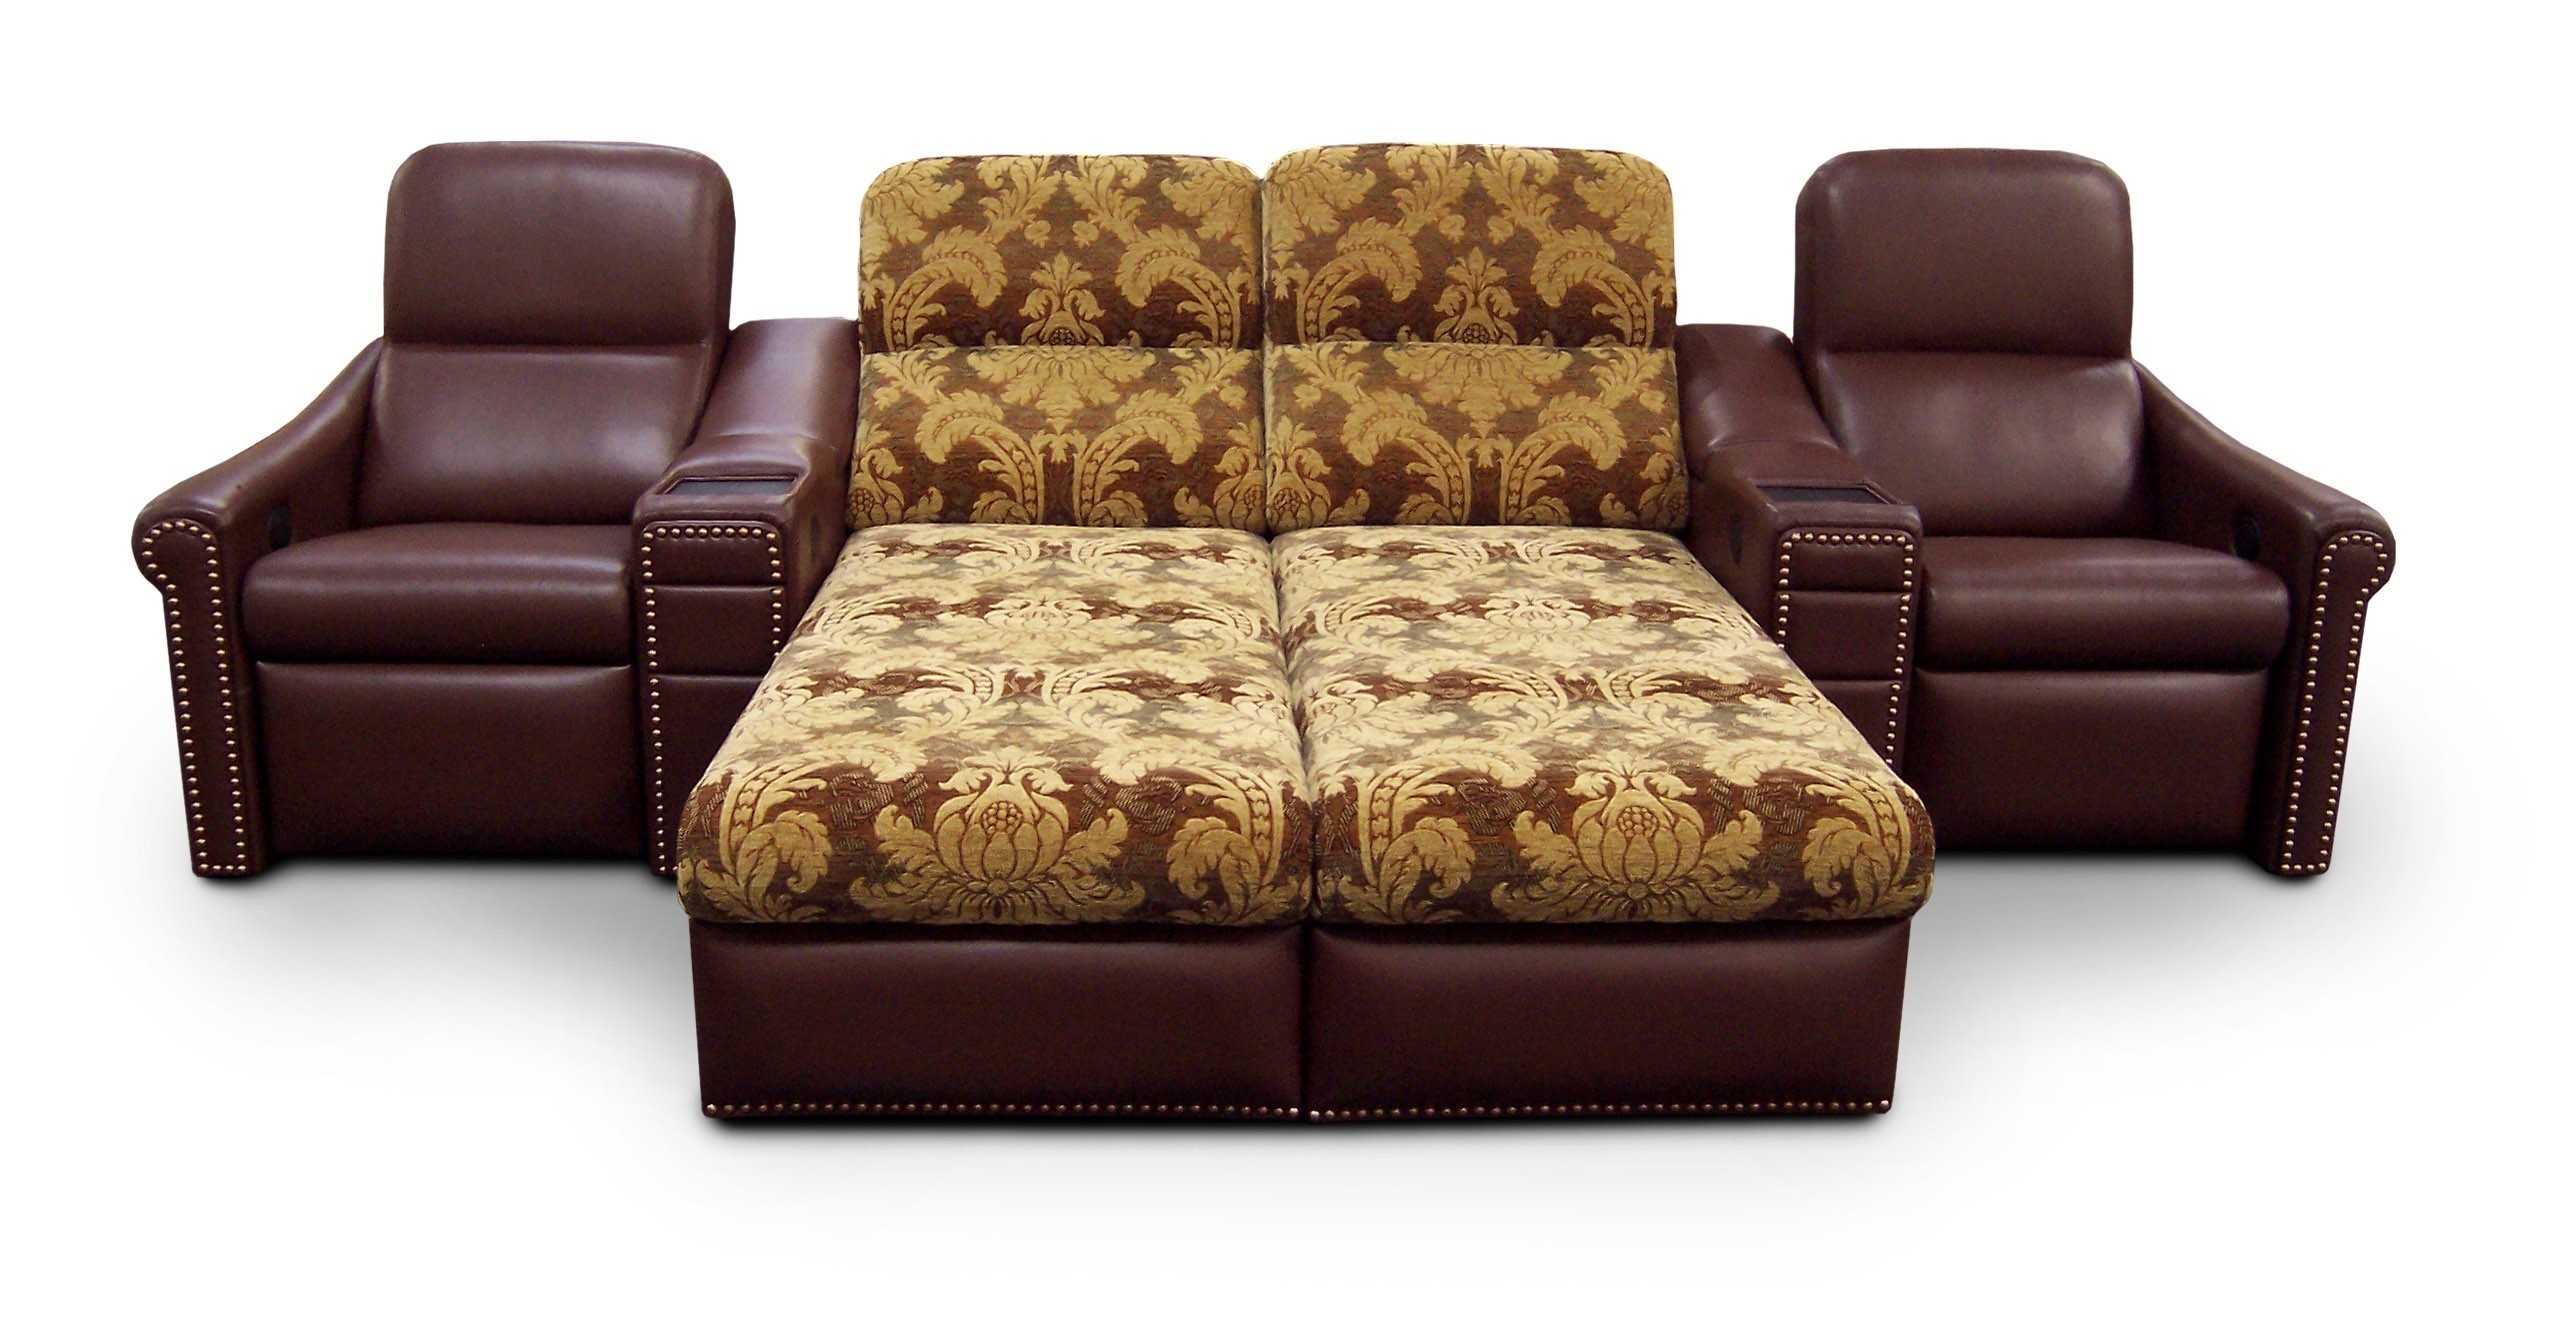 Awesome double chaise lounge sofa collection modern sofa